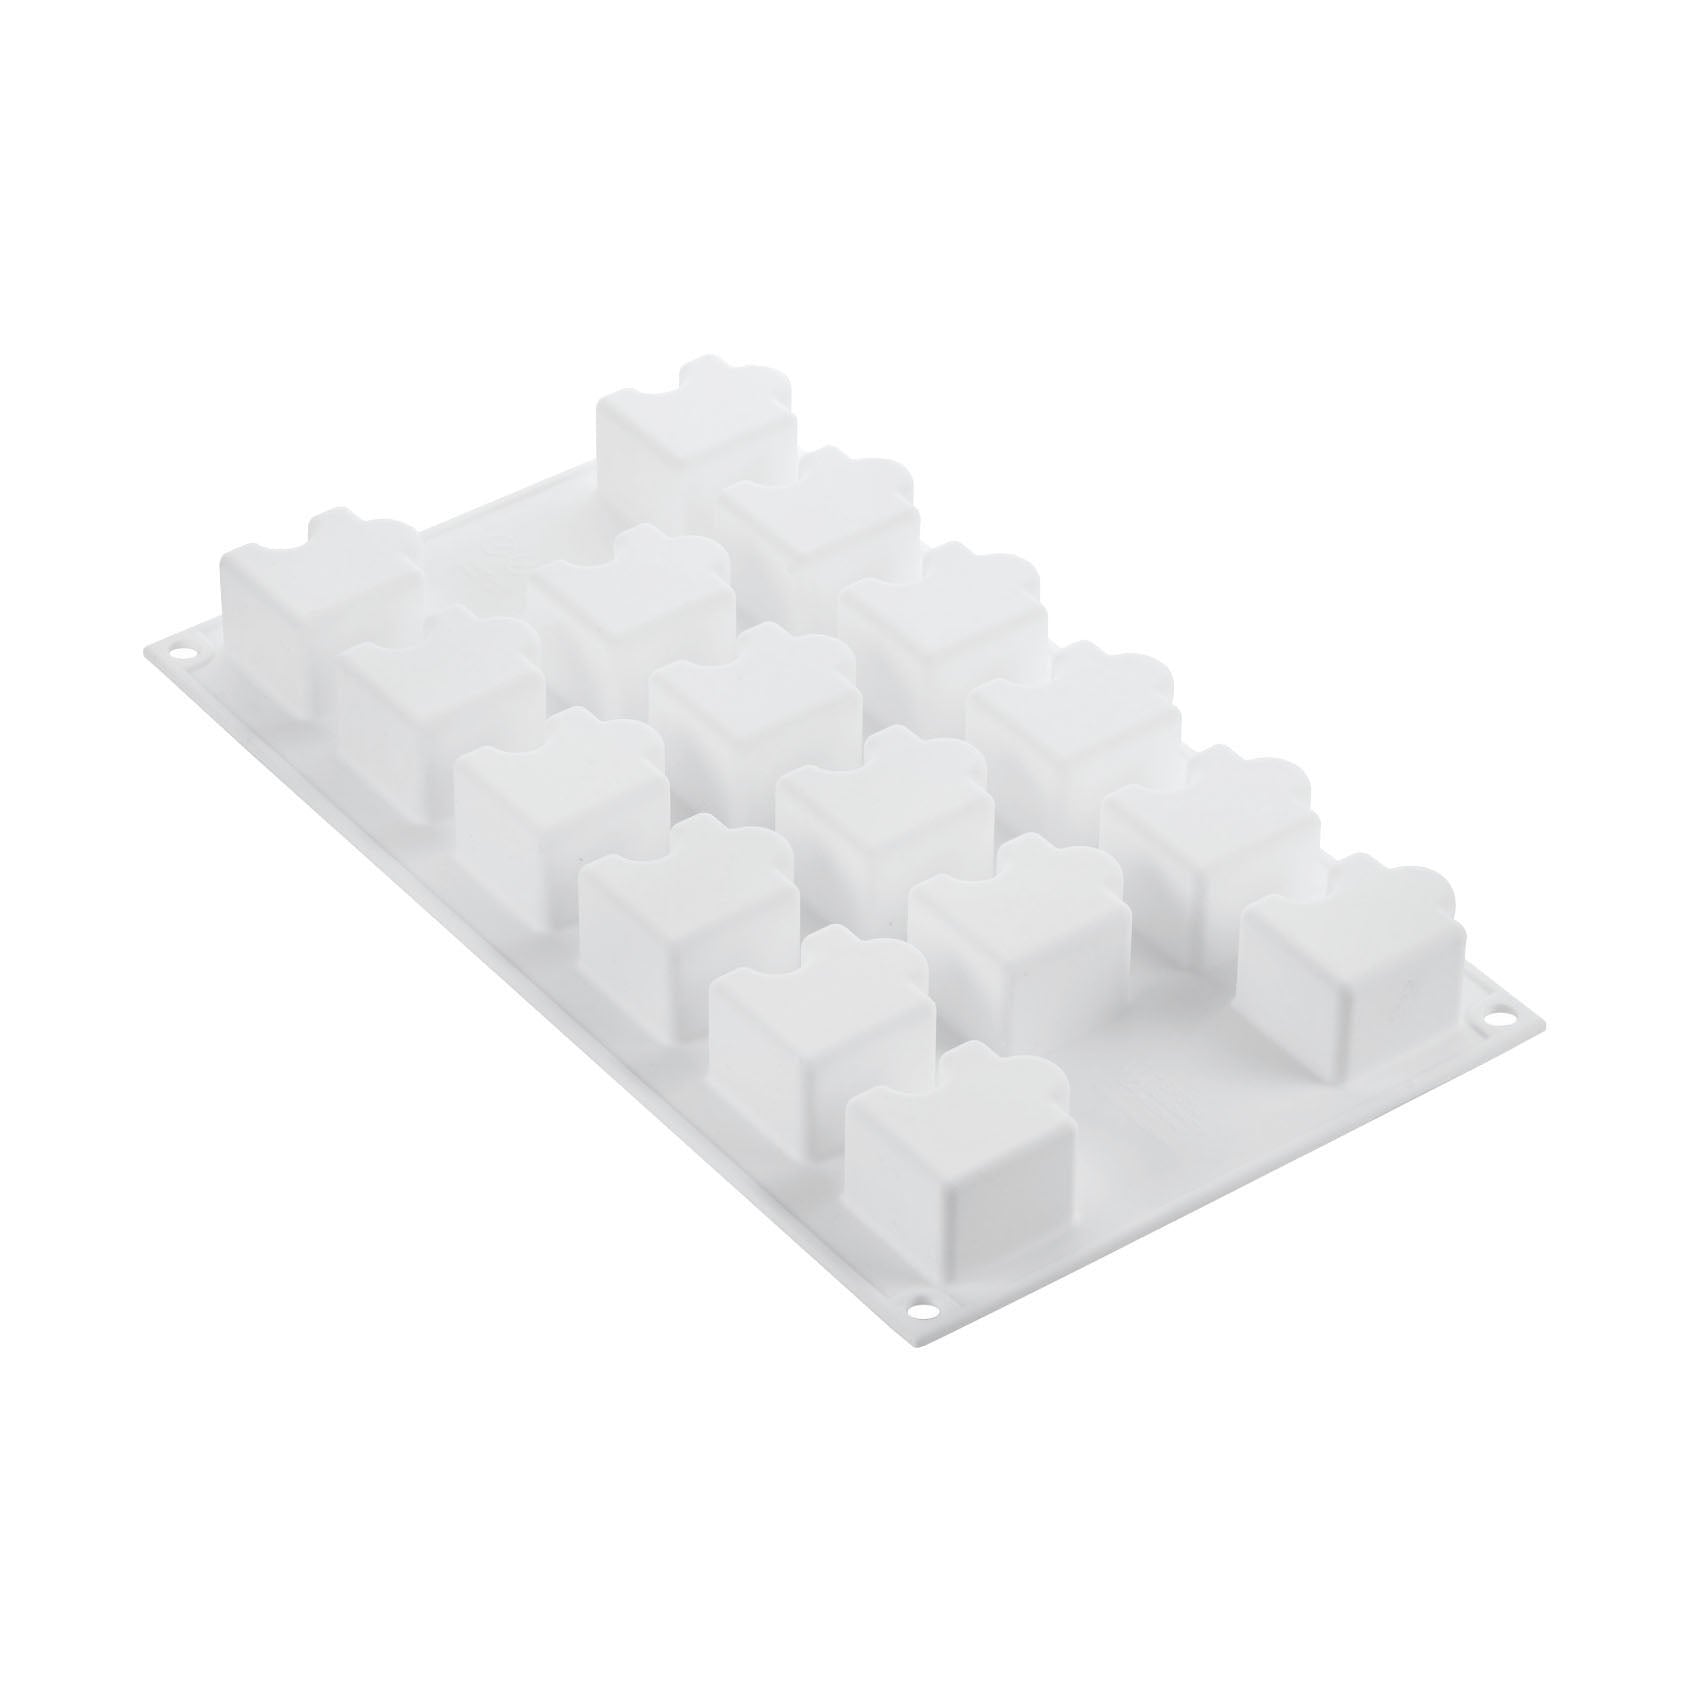 SILIKOMART Puzzle 30 (Silicone Mould + Cutter)